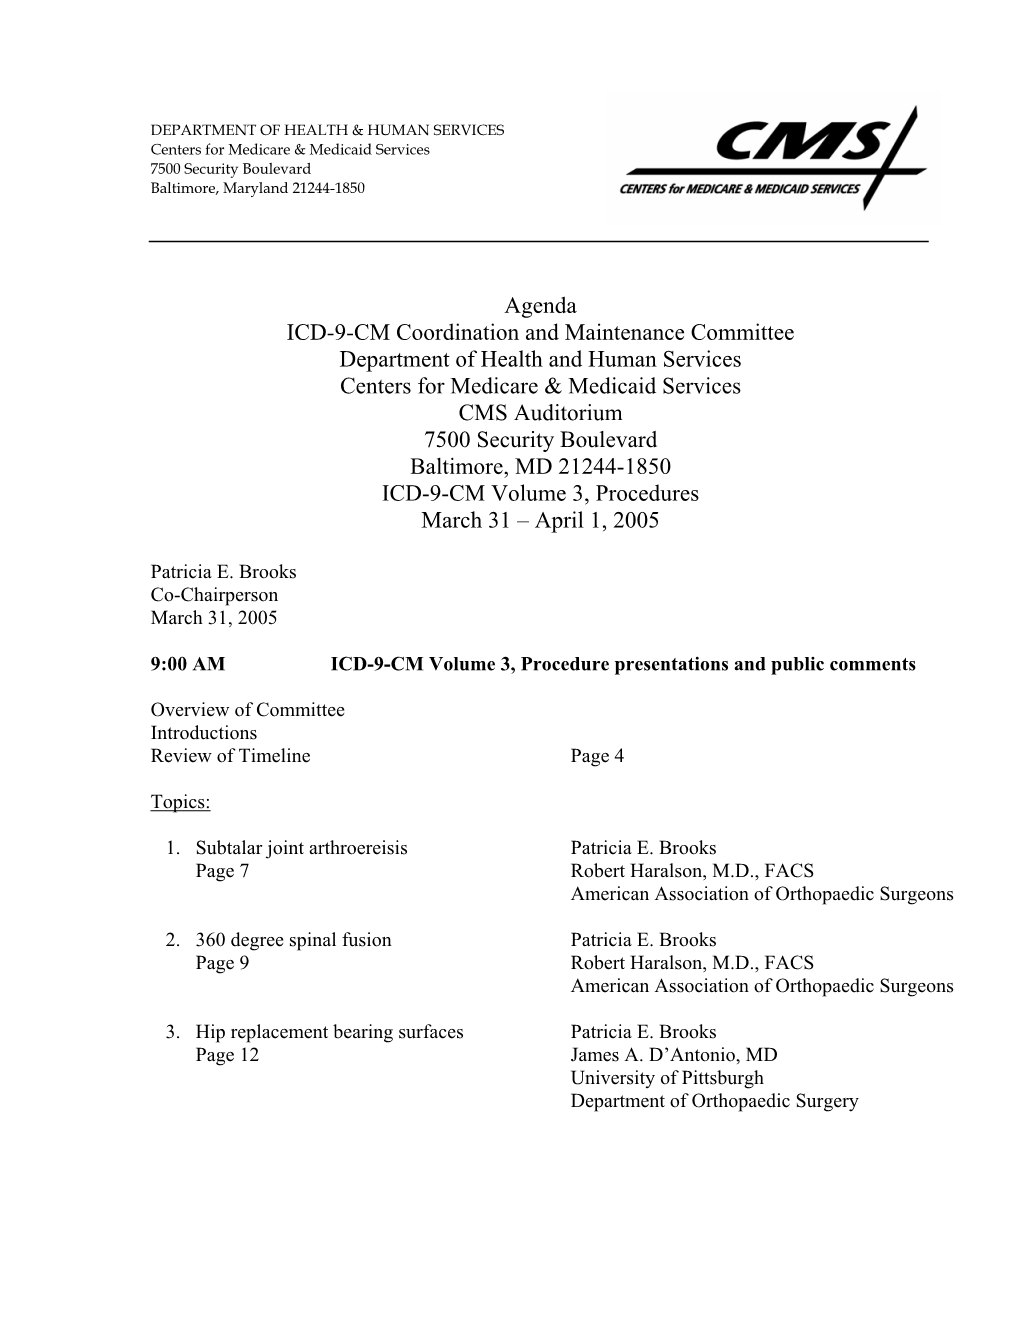 Agenda ICD-9-CM Coordination and Maintenance Committee